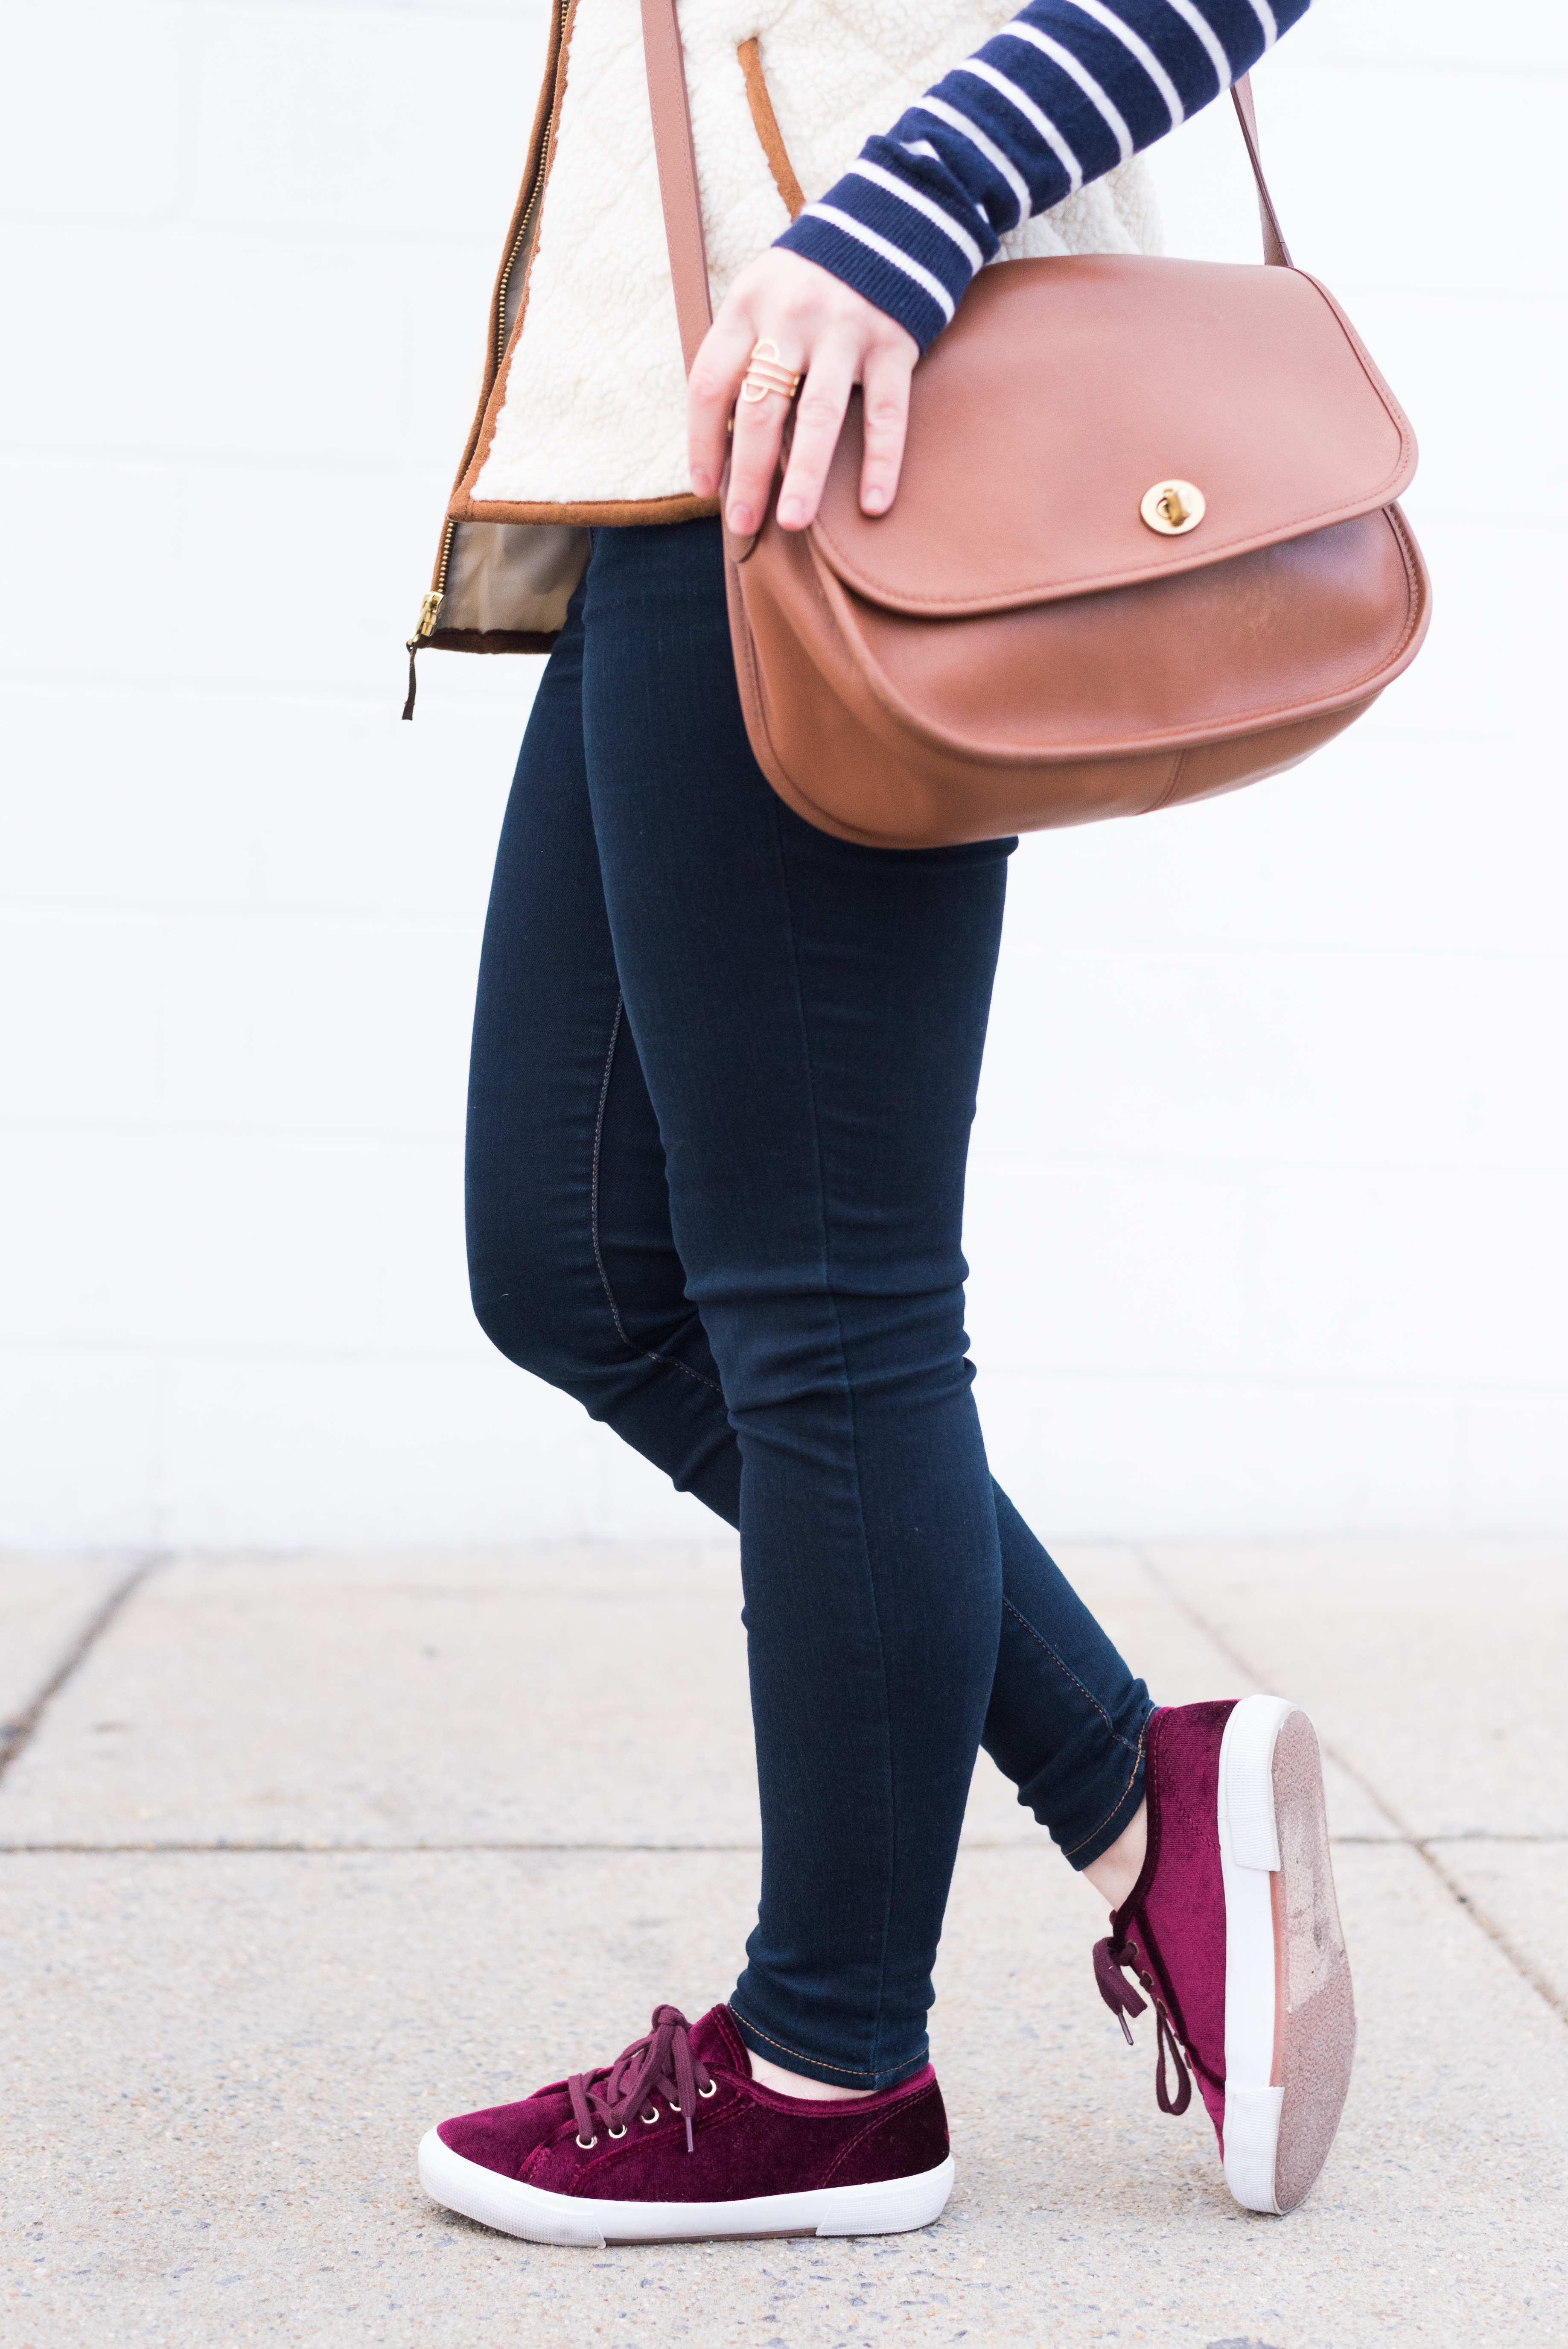 What I Learned From You | Something Good, @danaerinw, burgundy shoes, tennis shoes, sneakers, cranberry shoes, coach bag, crossbody bag, aeo jeans, fur vest, skinny denim